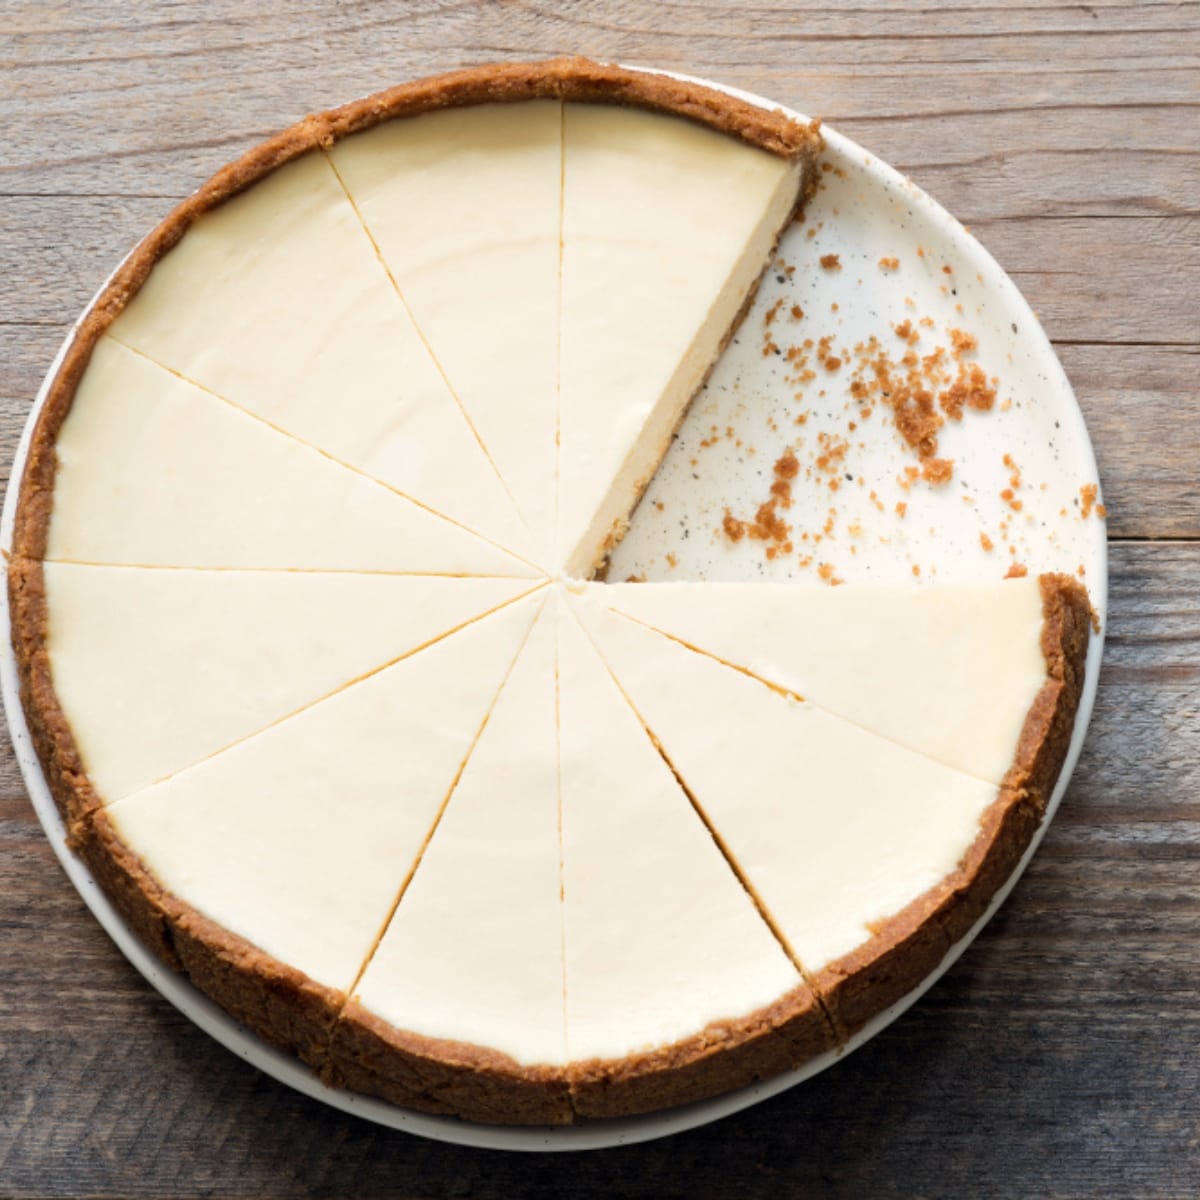 Top view of whole New York Cheesecake sliced with a piece removed